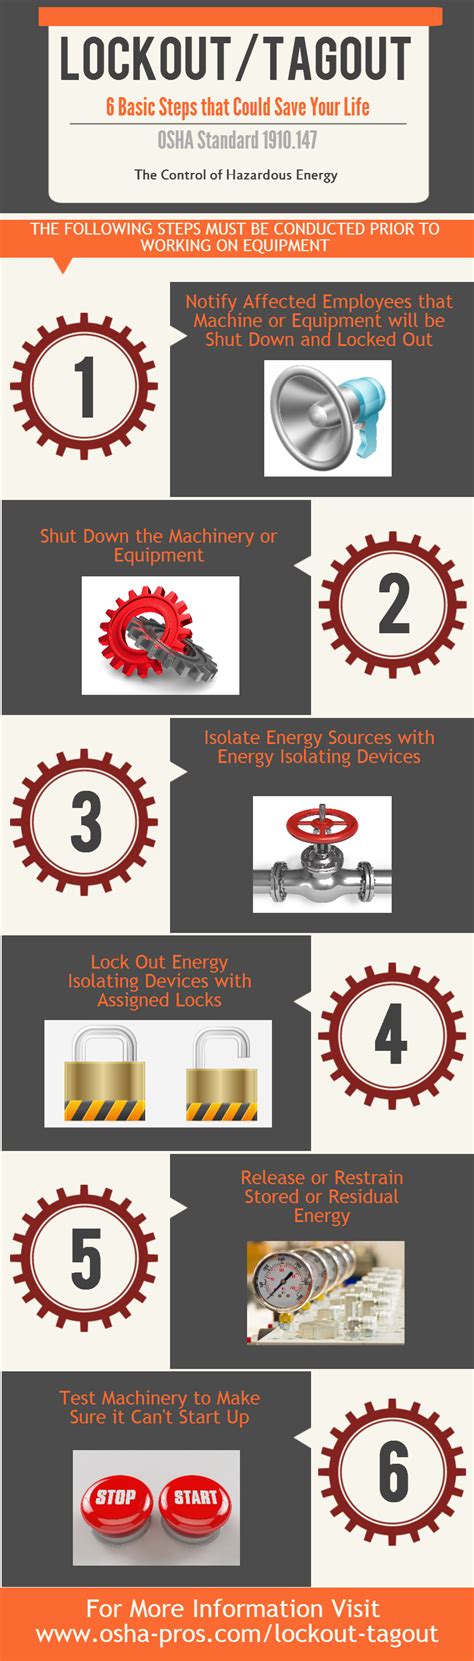 Lockouttagout Infographic 6 Critical Steps That Save Lives